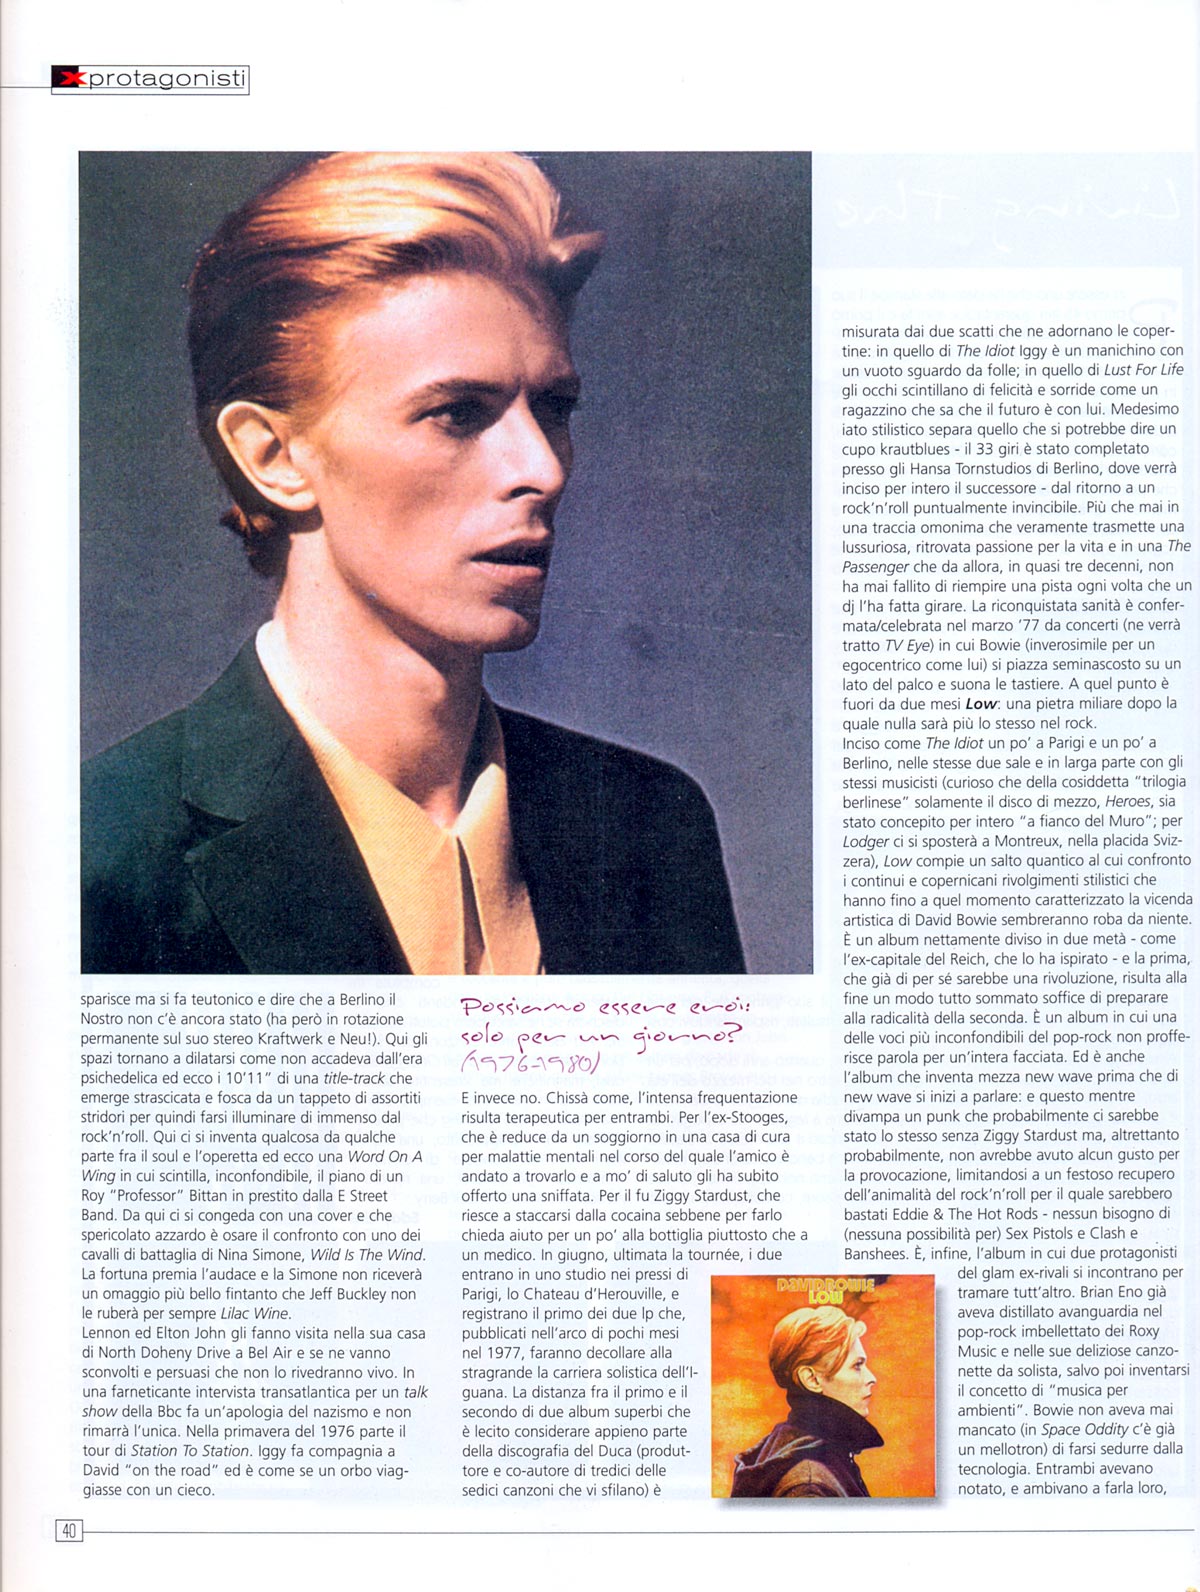 Bowie Stampa Mucchio Extra 2006